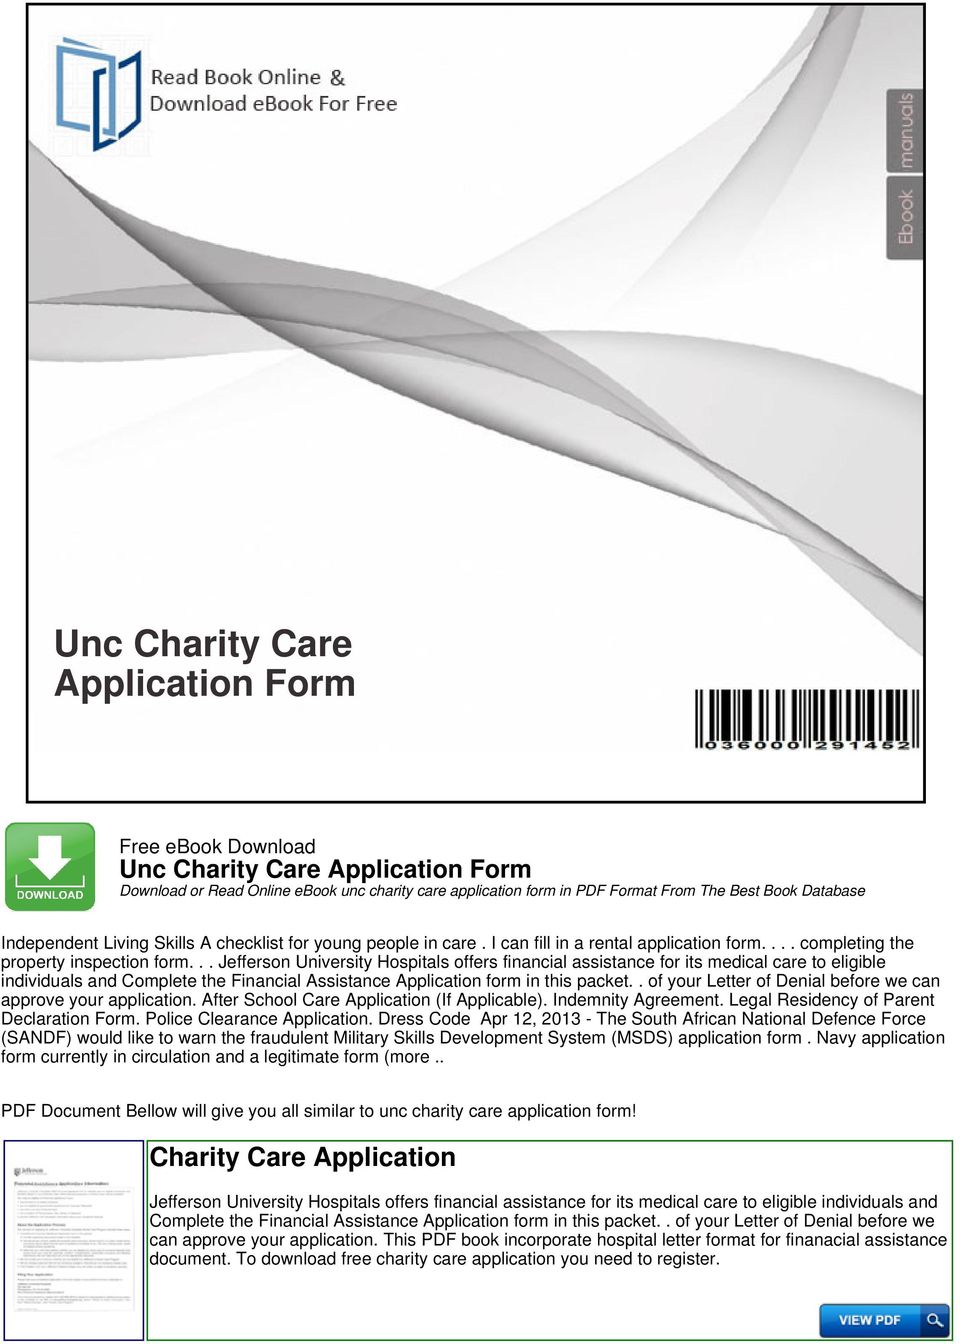 Unc Charity Care Application Form Pdf Free Download